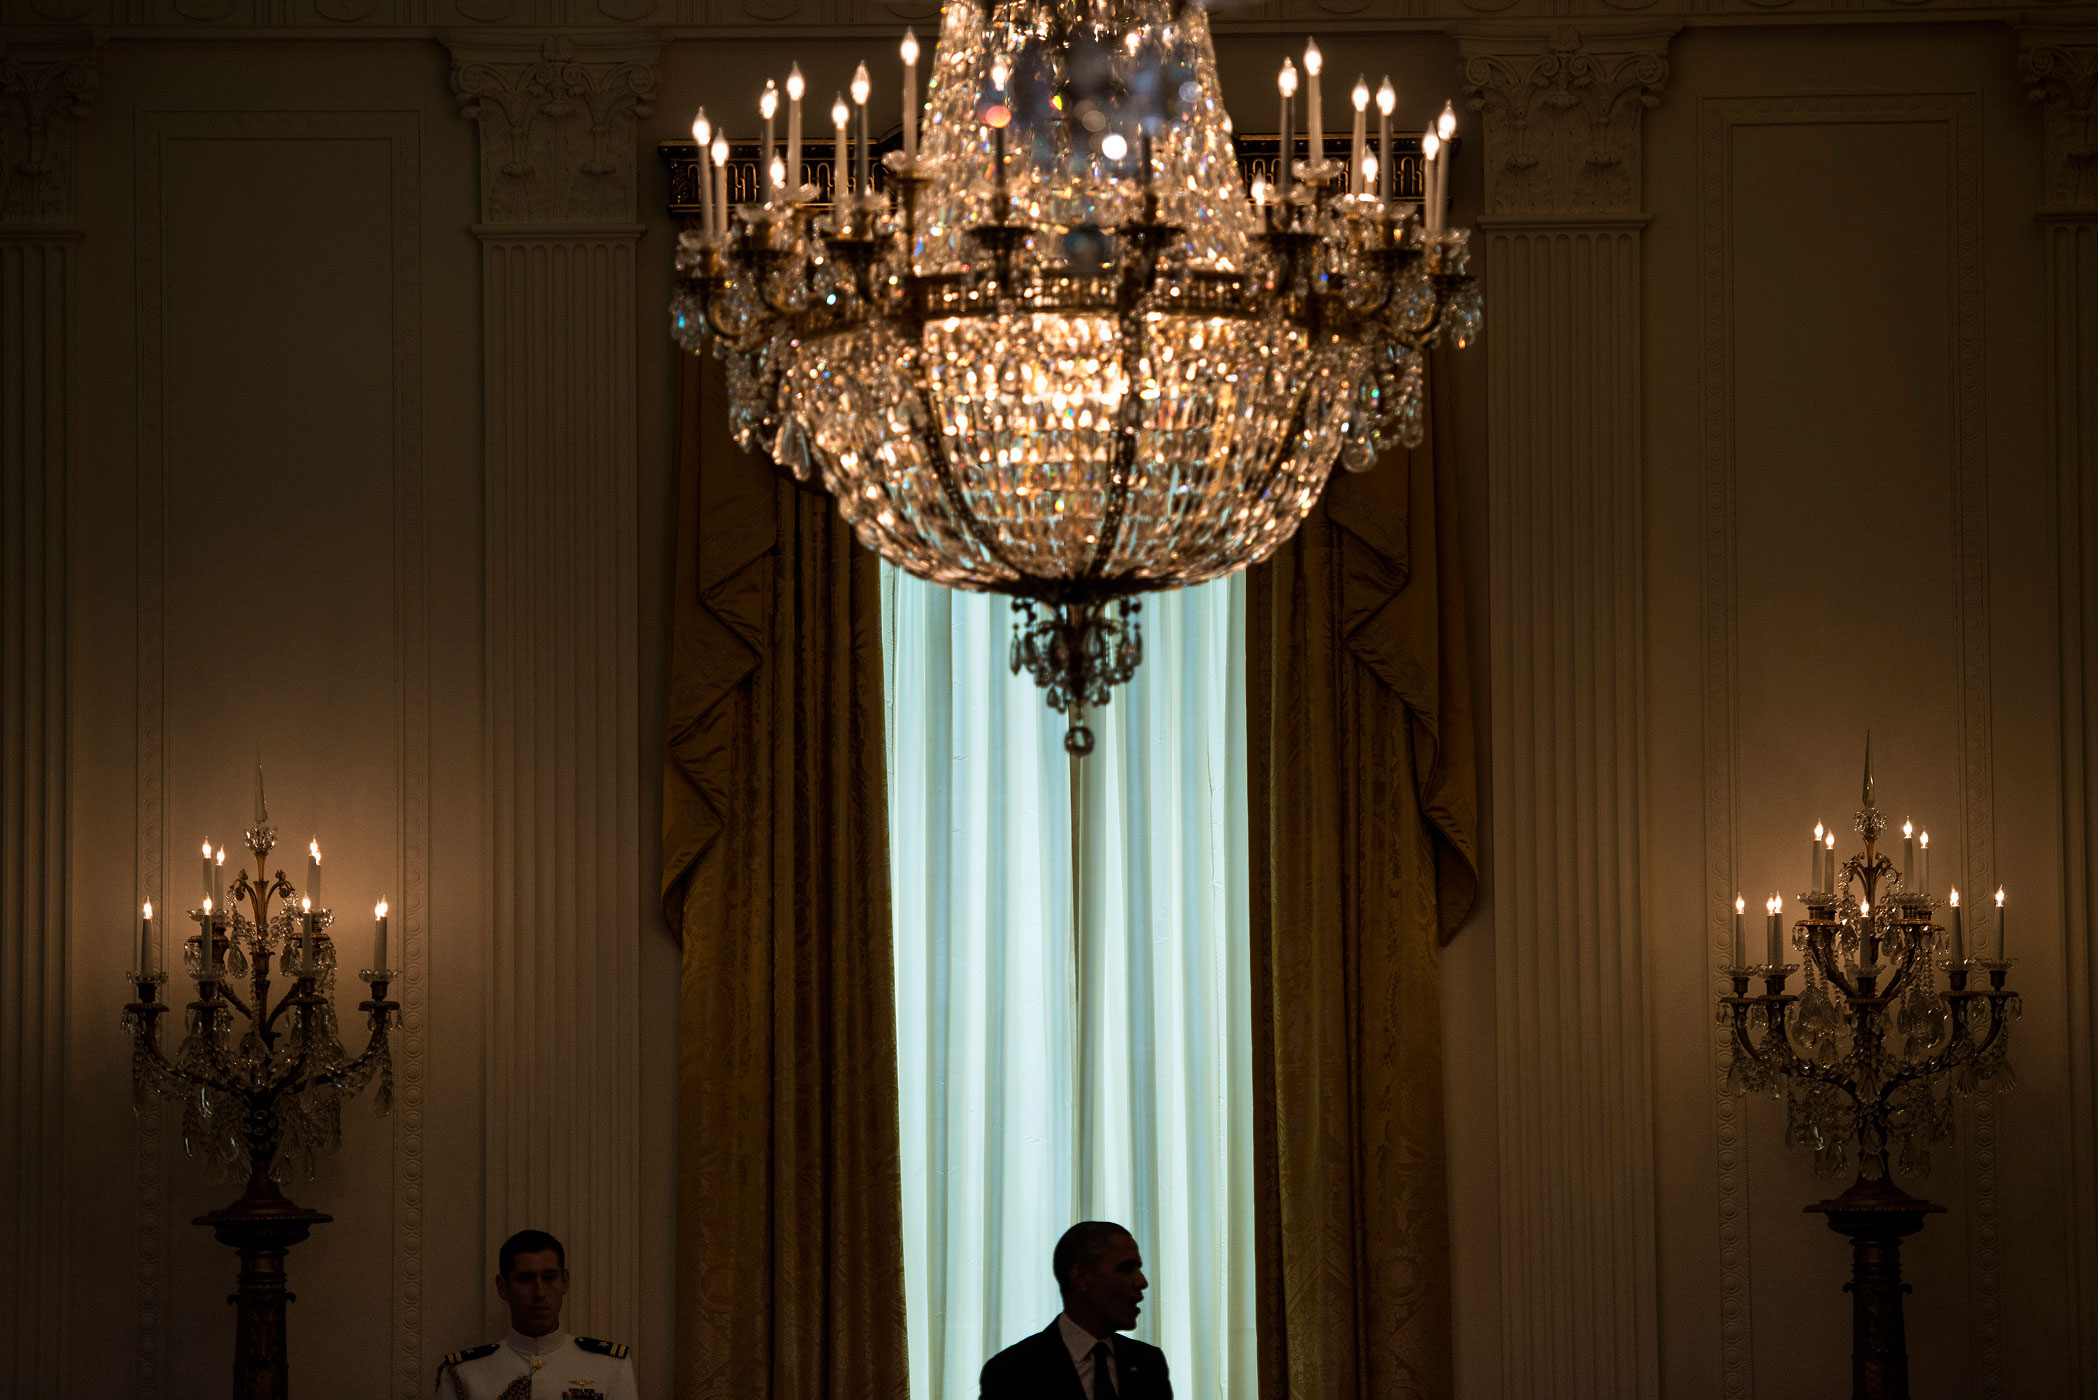 July 9, 2013. President Barack Obama greets guests during a kids' state dinner in the East Room Room of the White House.